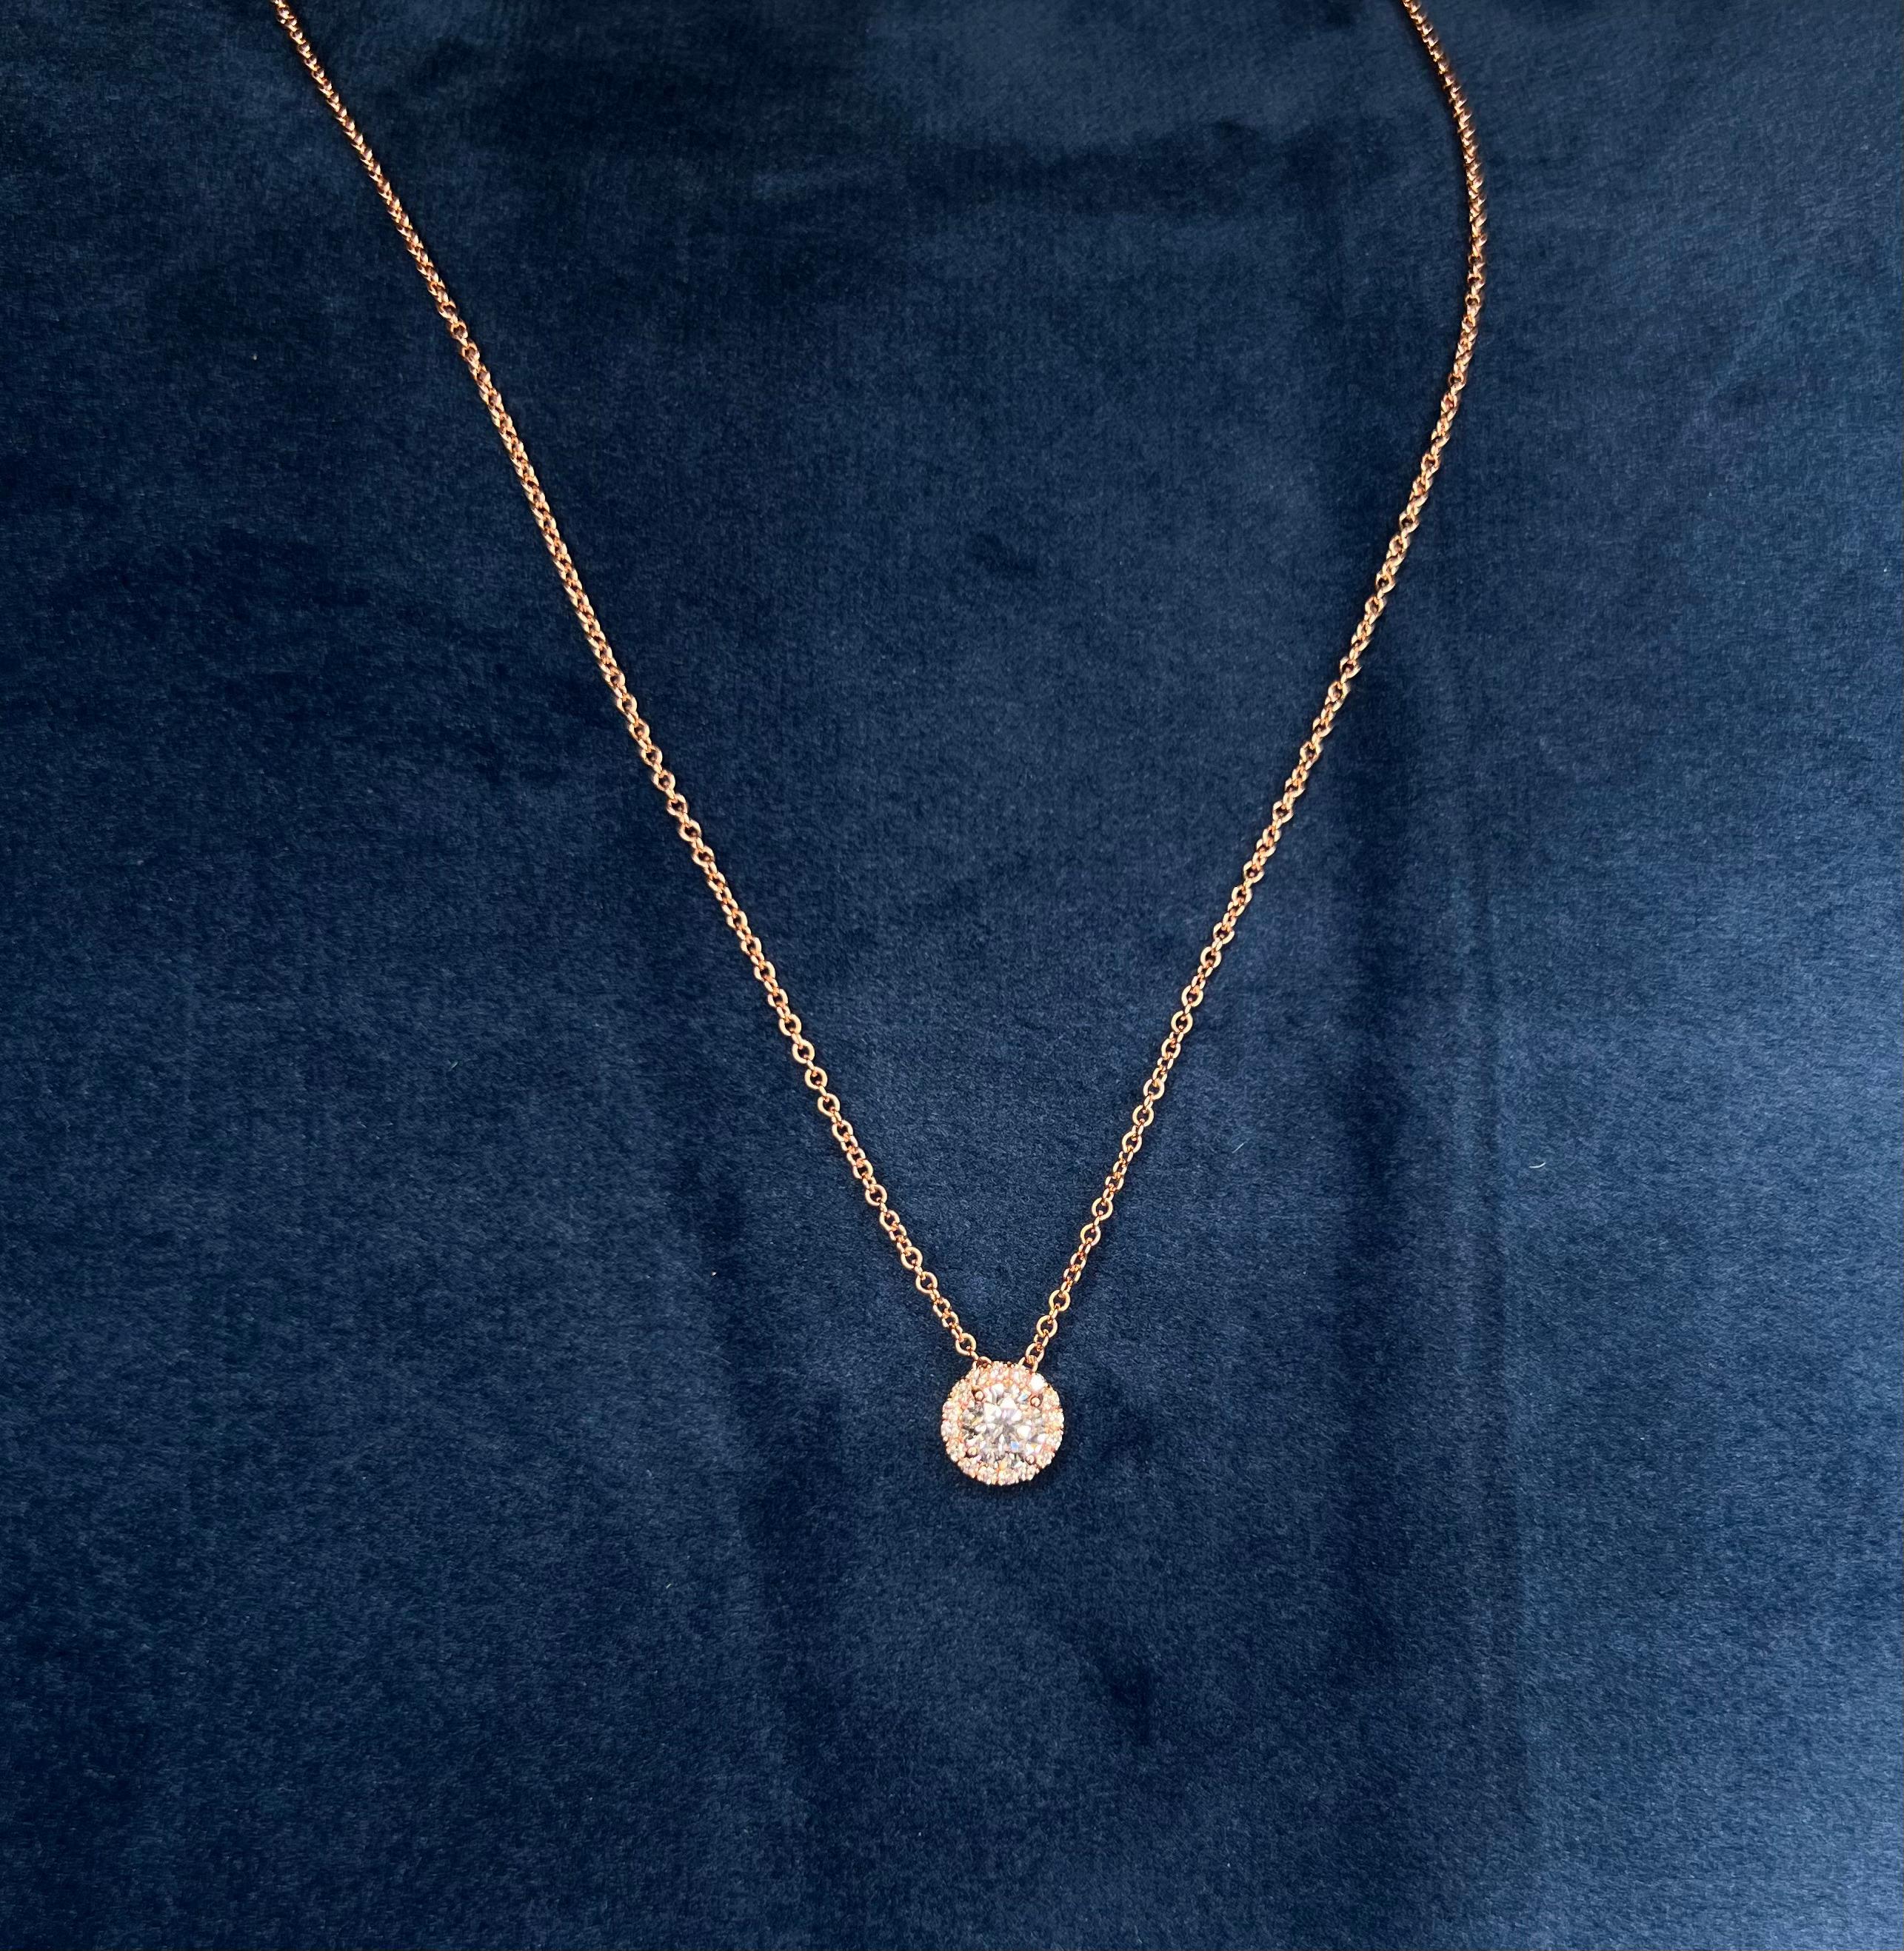 14k Rose Gold 0.90 Carat Round Cut Diamond Solitaire Pendant Necklace In New Condition For Sale In Los Angeles, CA